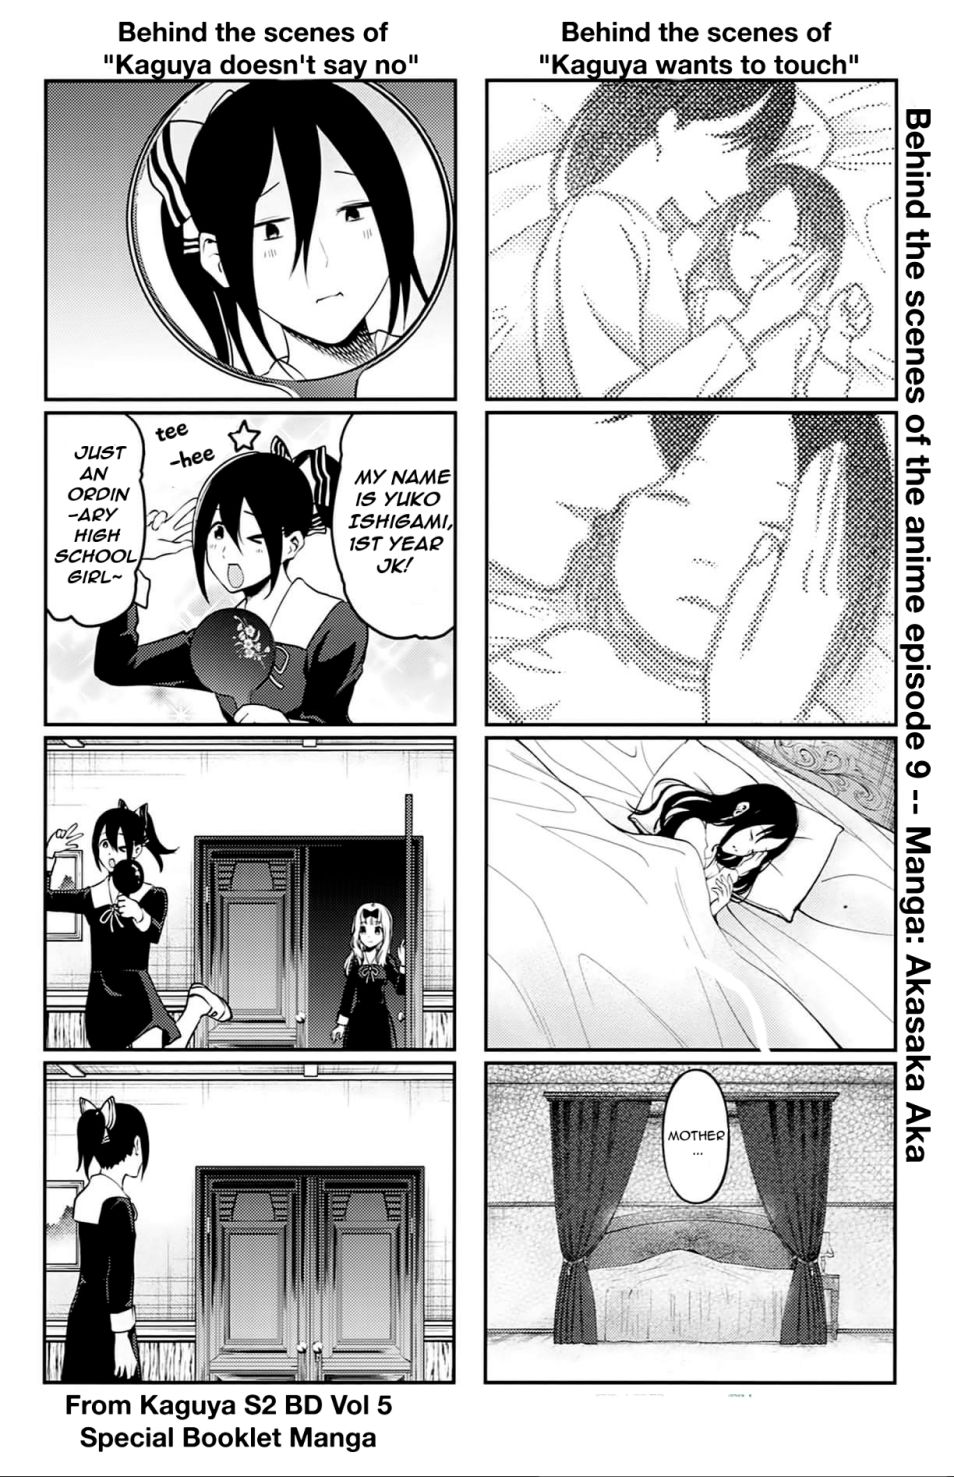  chapter 212.5 image 009